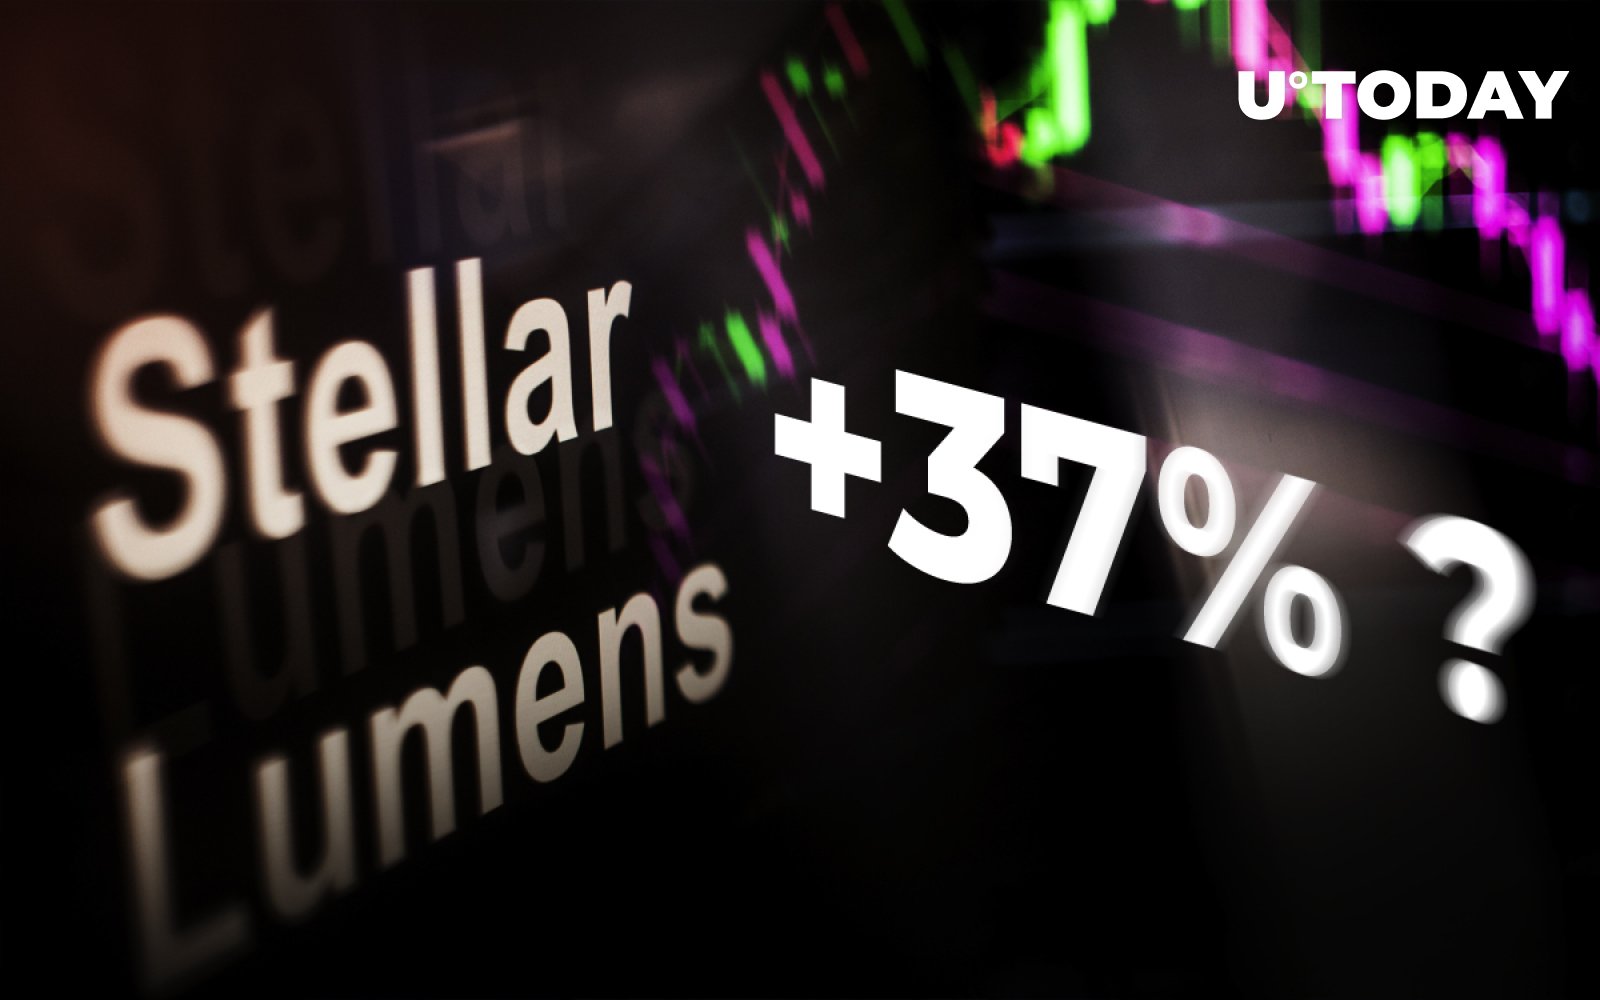 let at håndtere træ ukuelige Stellar Lumens (XLM) to Post Another 37 Percent Gain after Recent Pump,  Crypto Trader Says